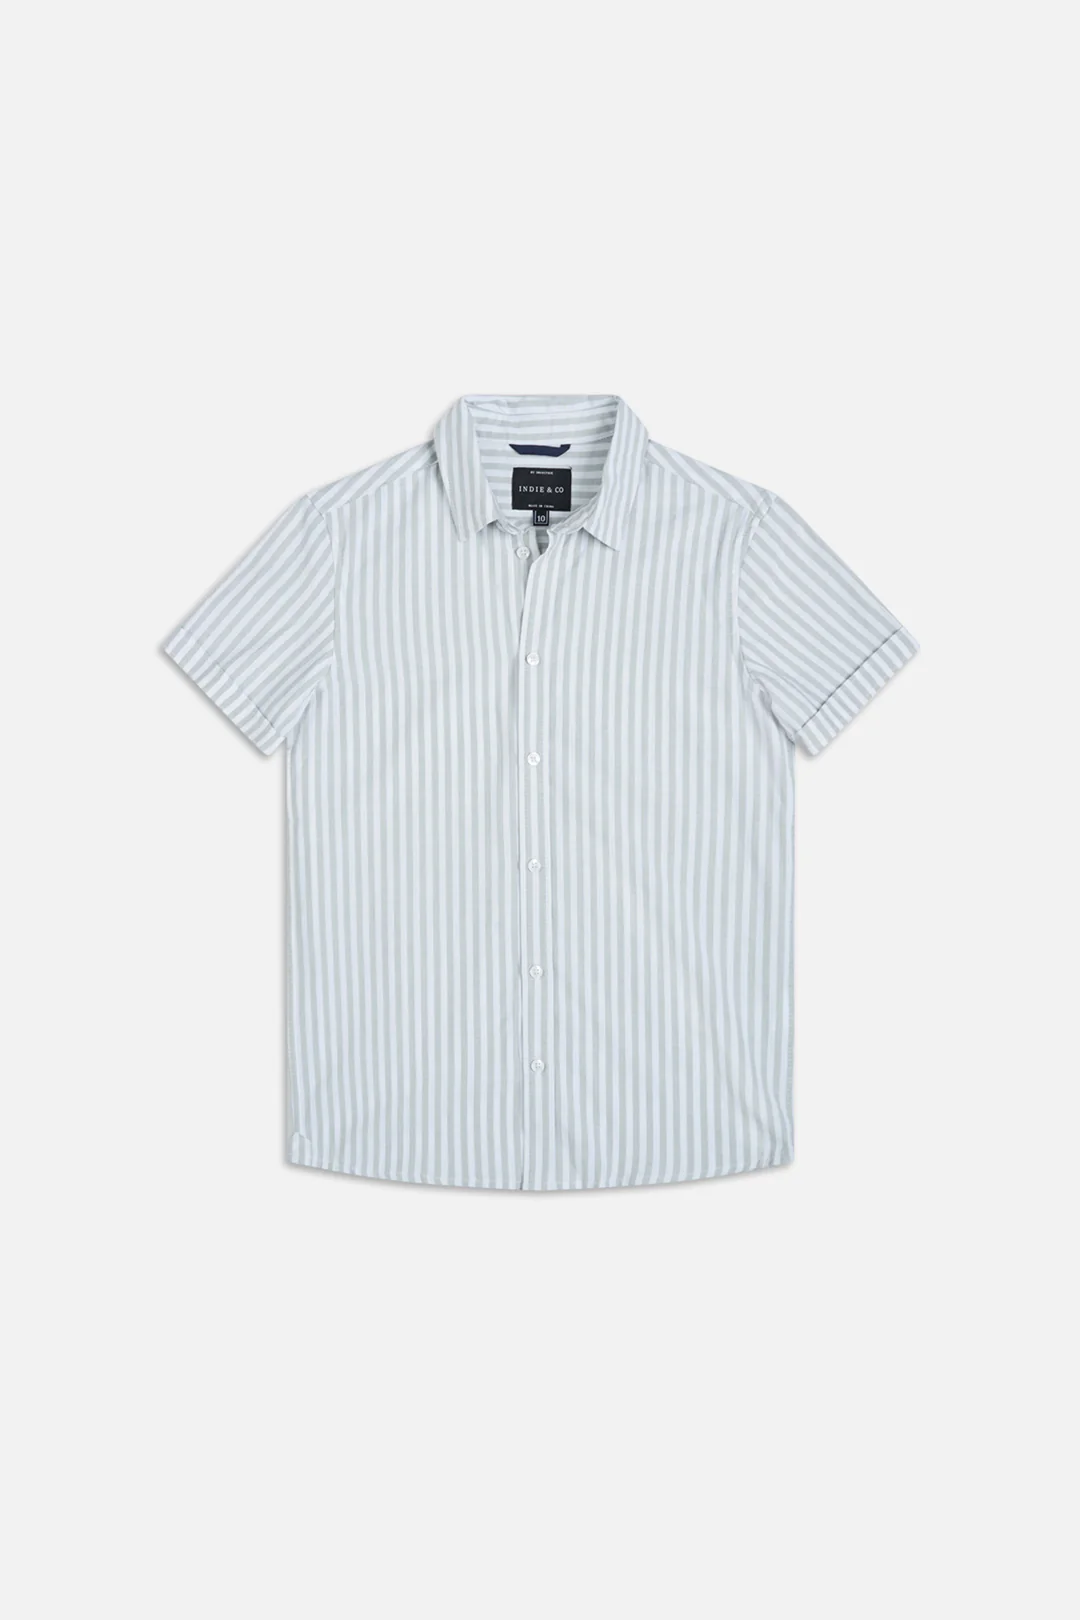 Indie Kids - The Mayfield Shirt - White | Everythings Rosie